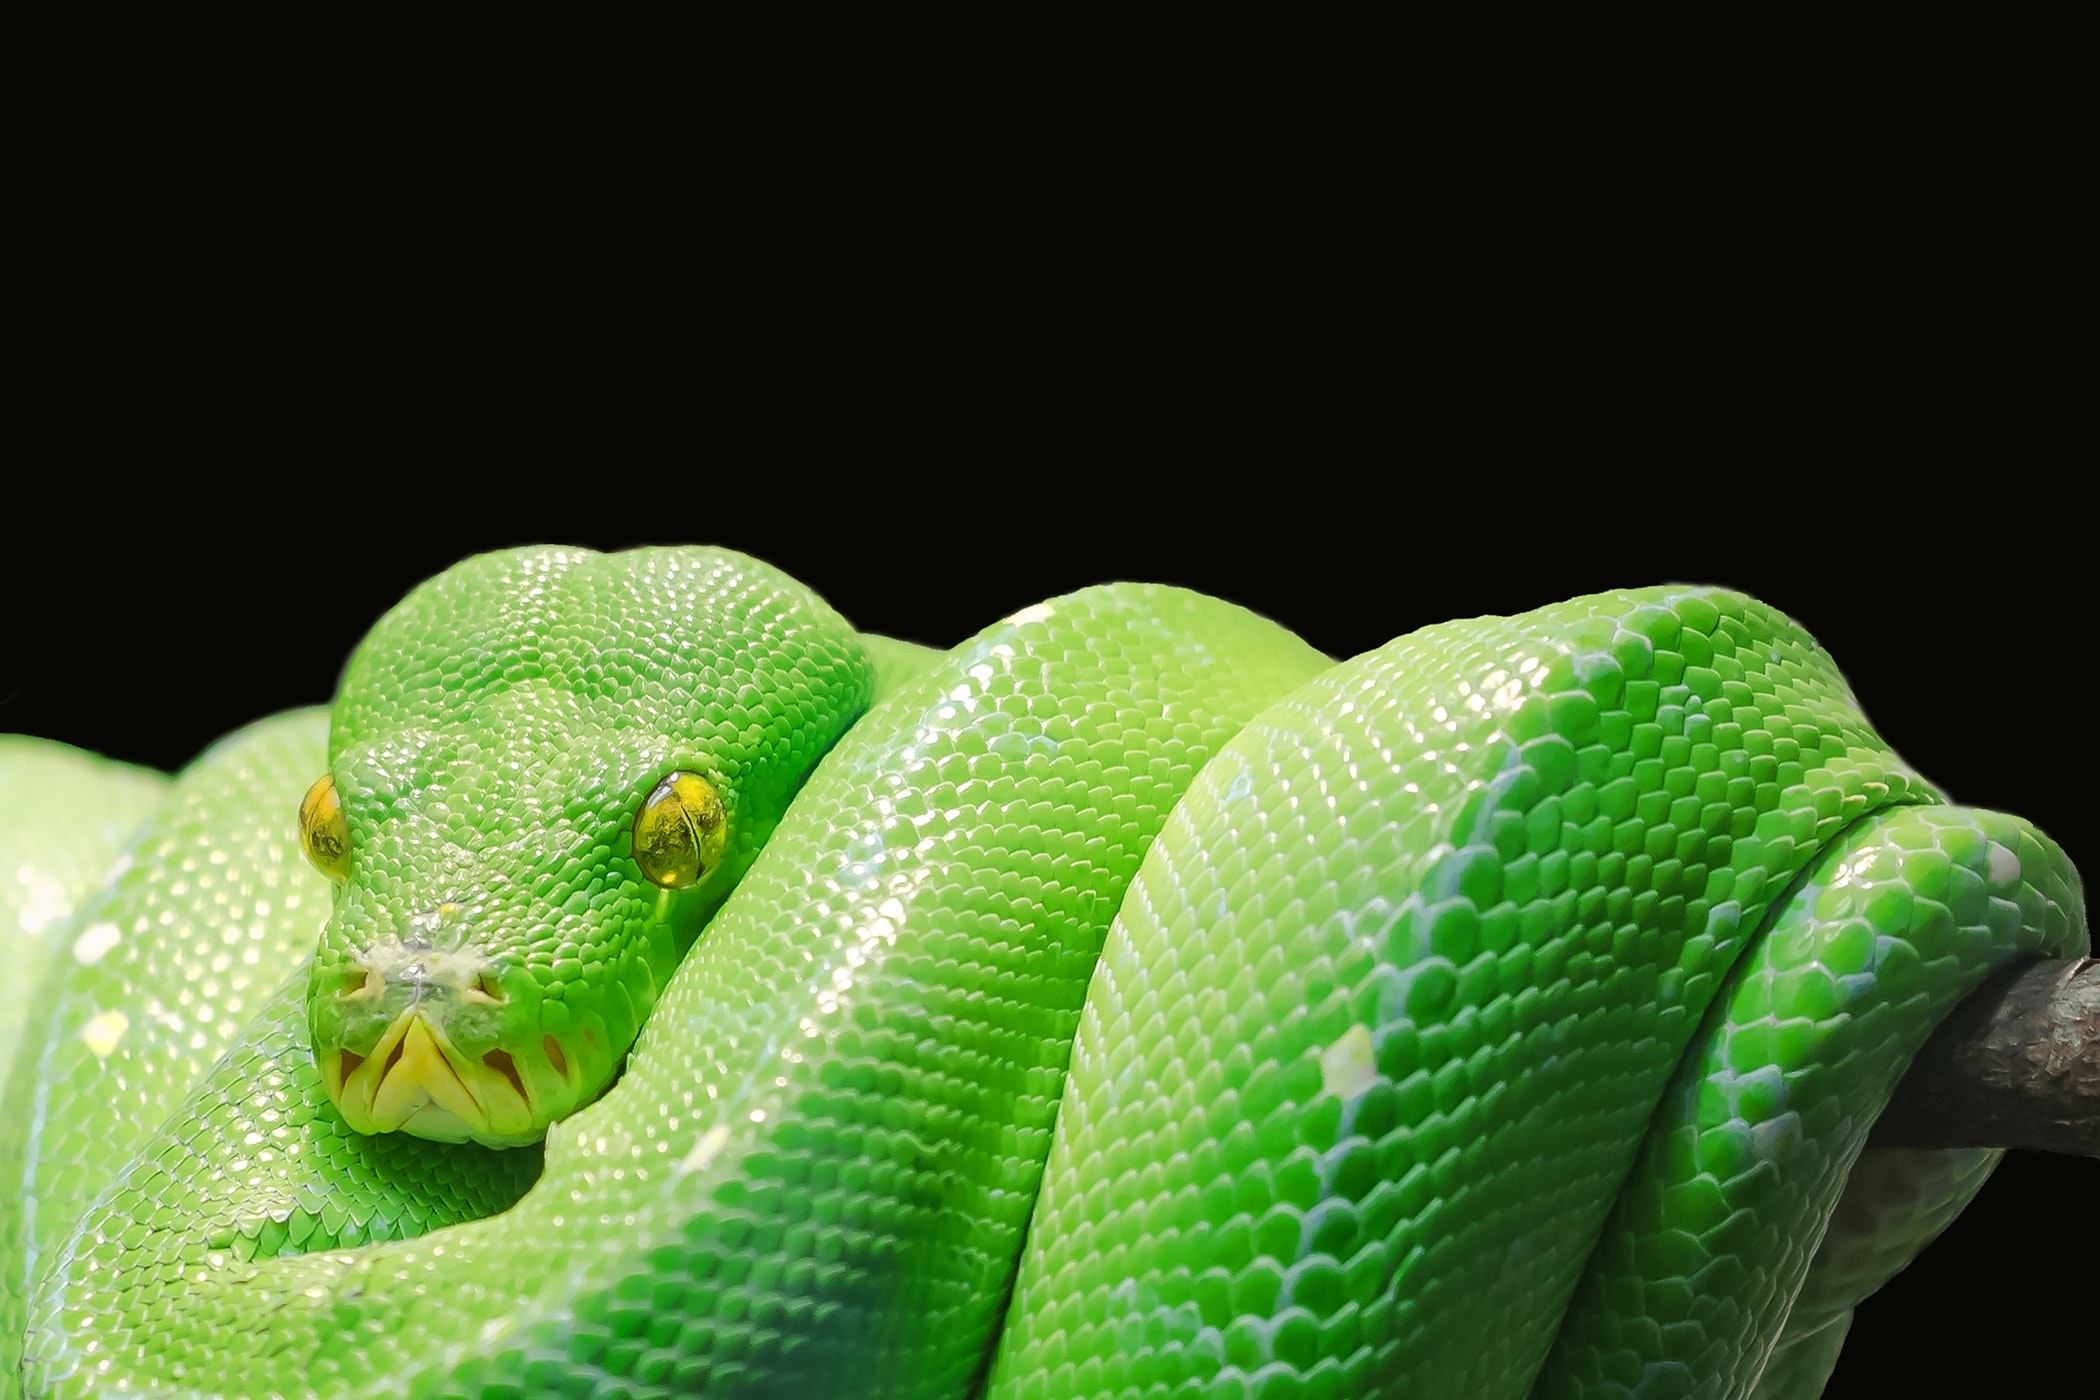 a green snake coiled on a branch